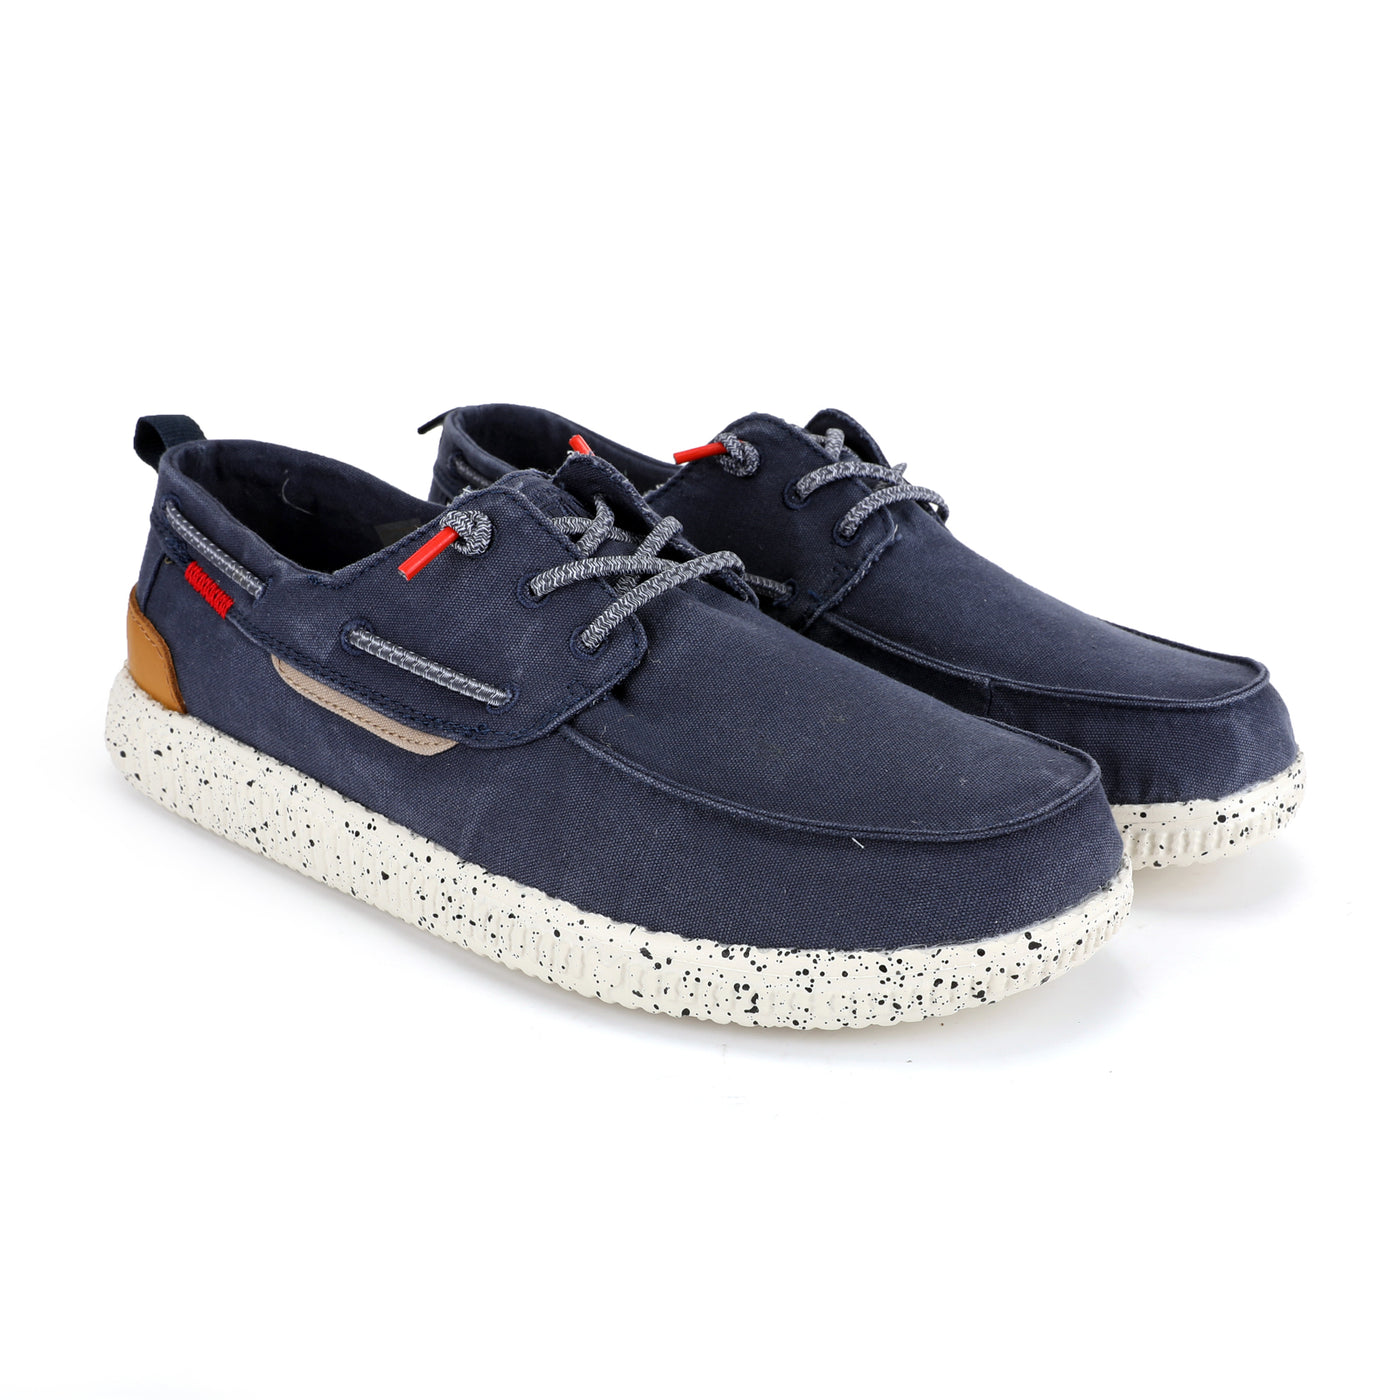 WP150 Jack Navy Blue Canvas Easy-On Deck Shoes